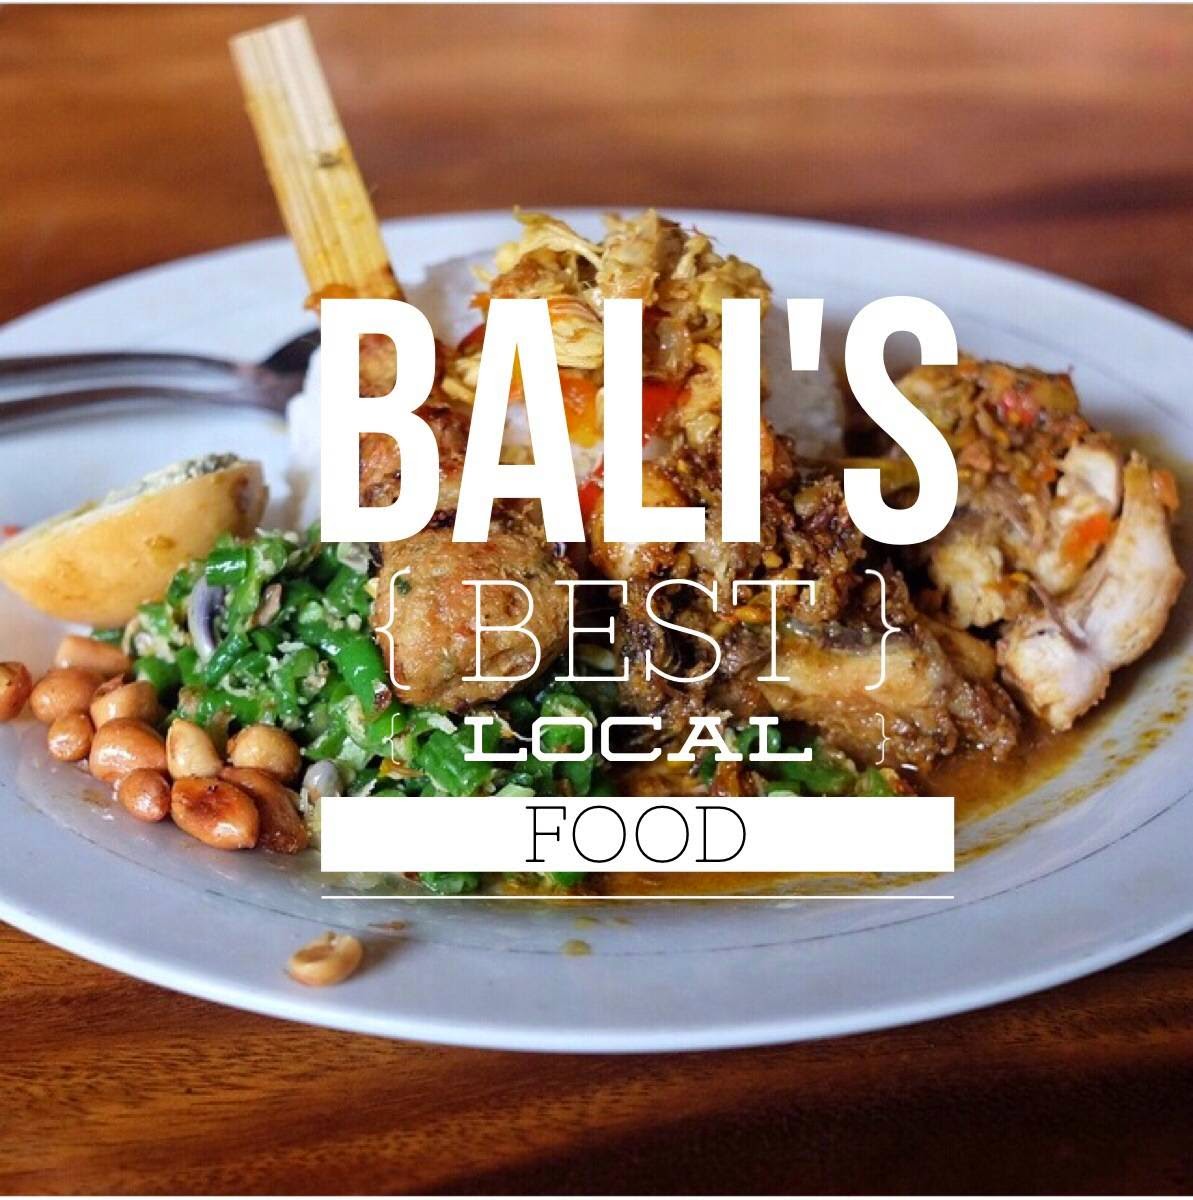 Ivy's Life: Ivy's Travel: The Best Local Food in Bali